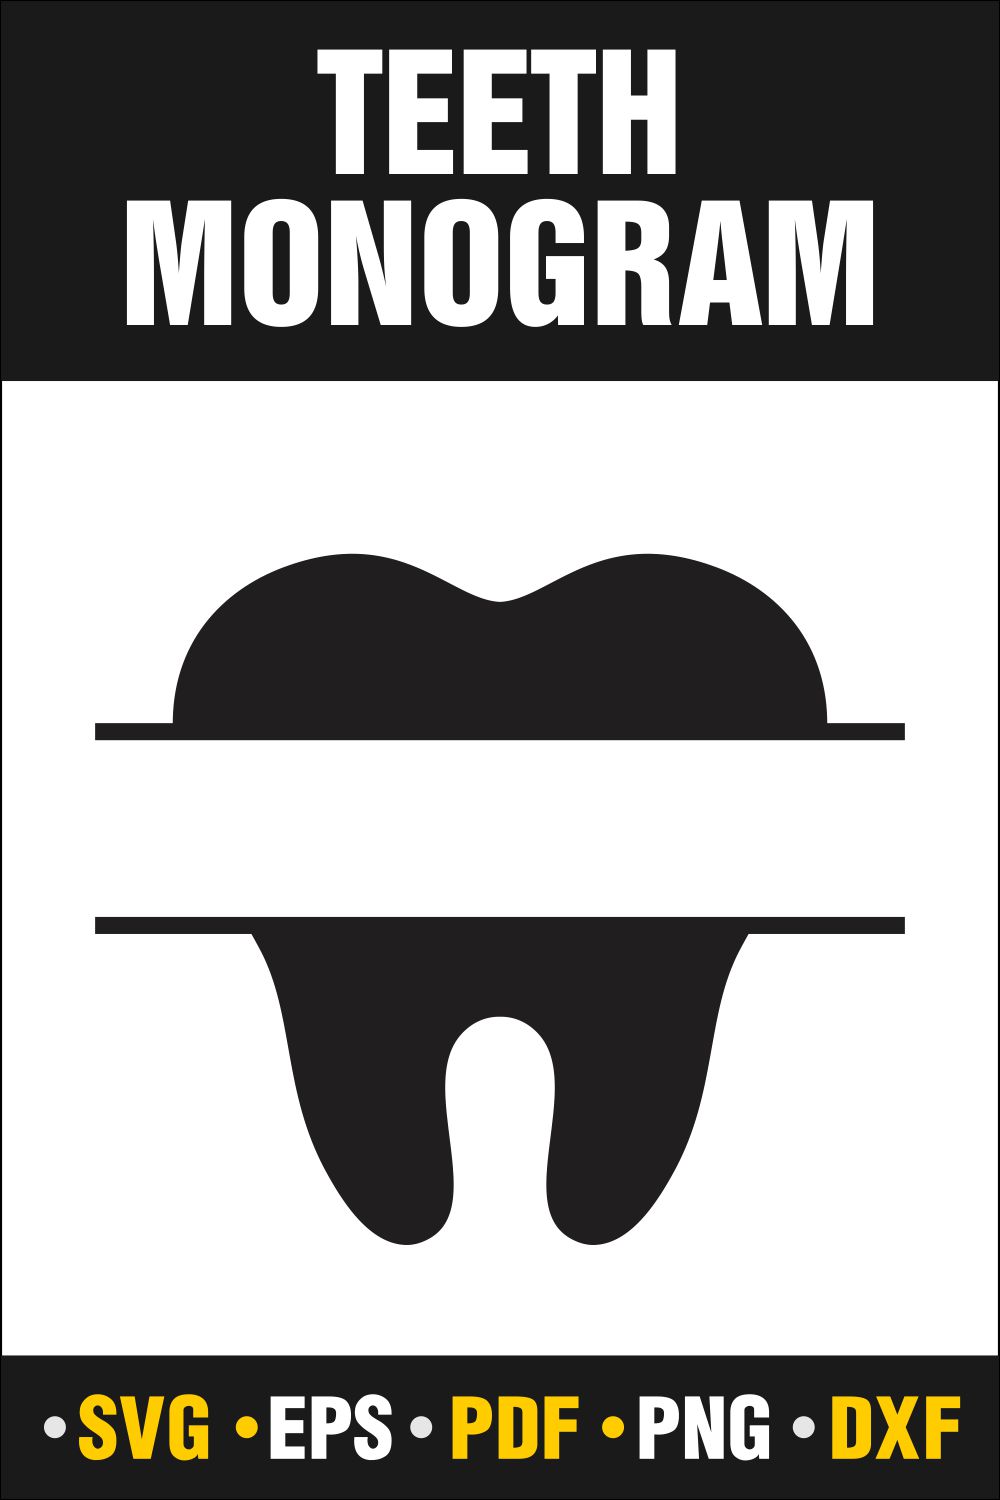 Teeth Monogram, tooth, Smile Monogram Svg Vector, Vector Cut file Cricut, Silhouette , PDF, PNG, DXF, EPS - Only $3 pinterest preview image.